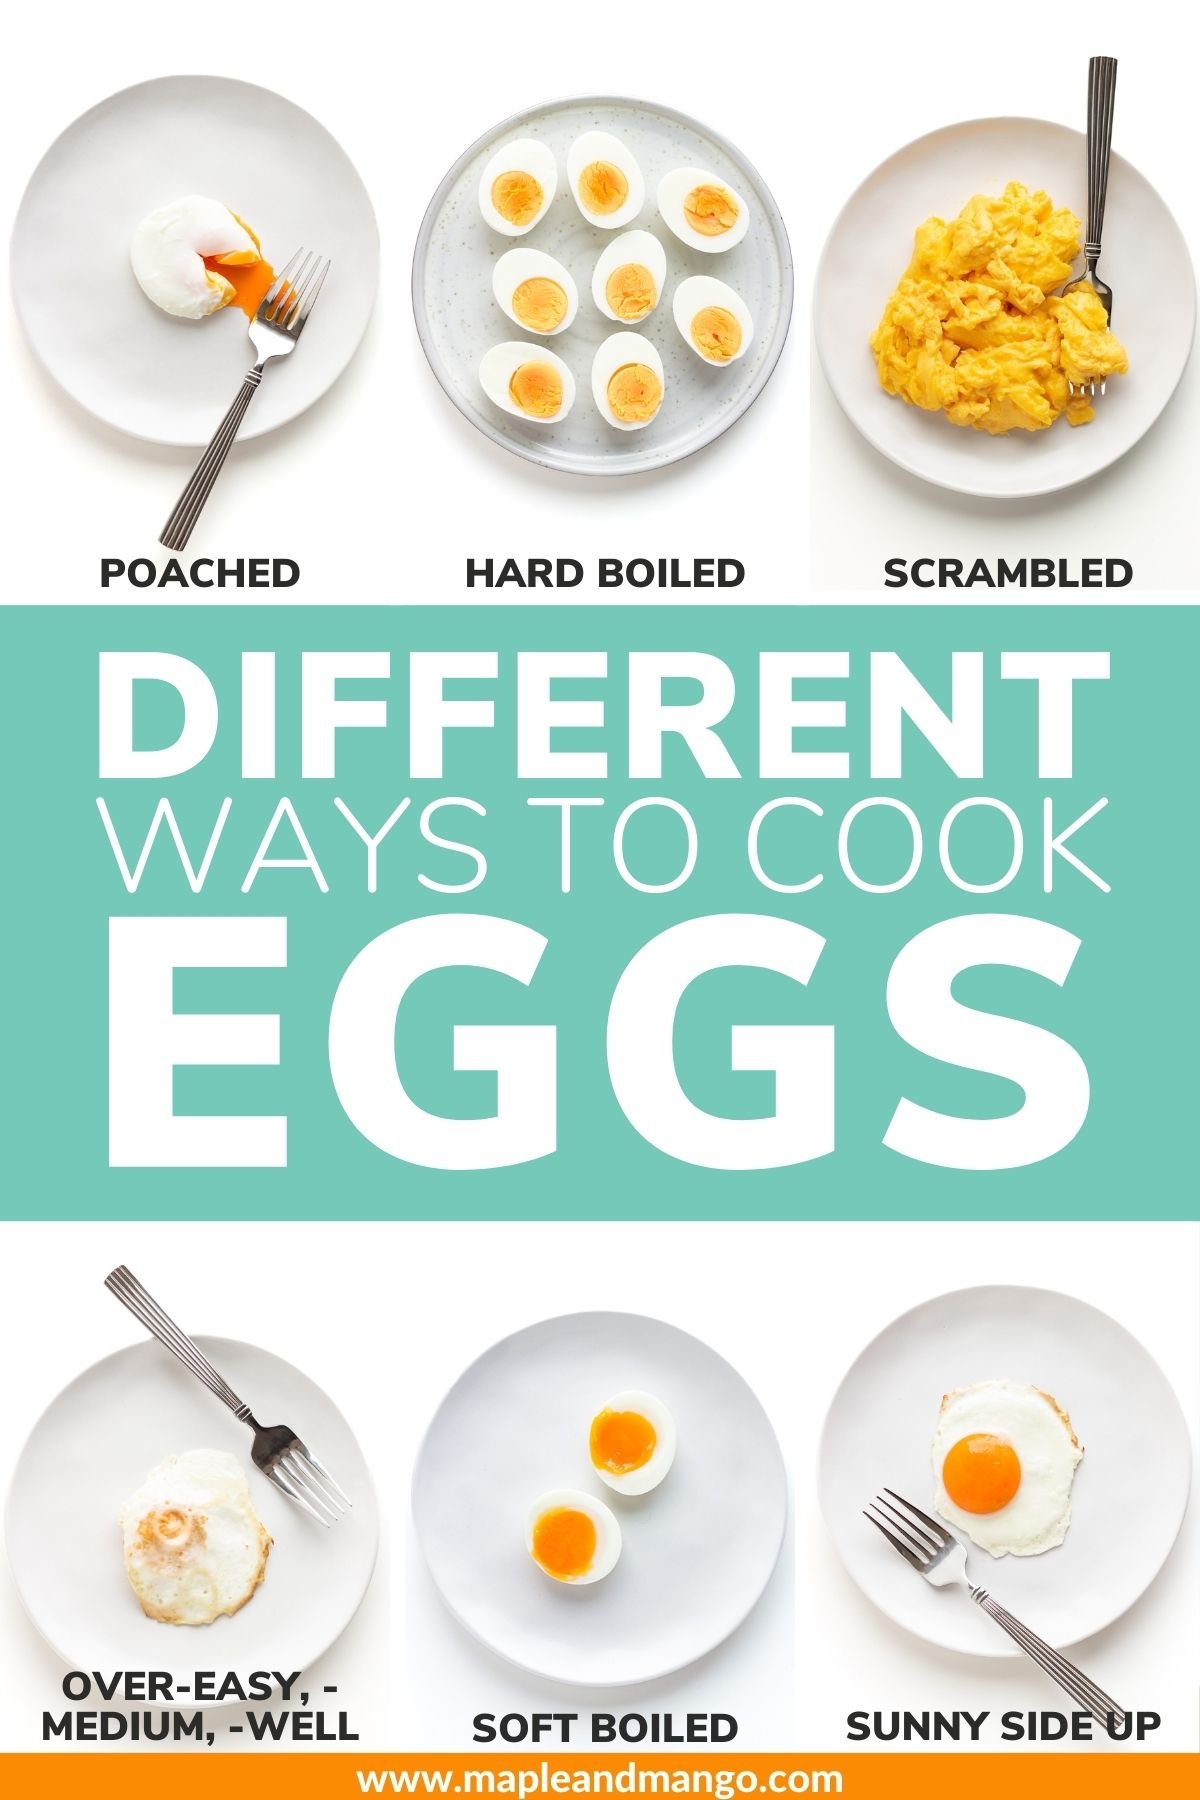 Pinterest graphic showing a variety of different types of cooked eggs with text overlay "Different Ways To Cook Eggs".